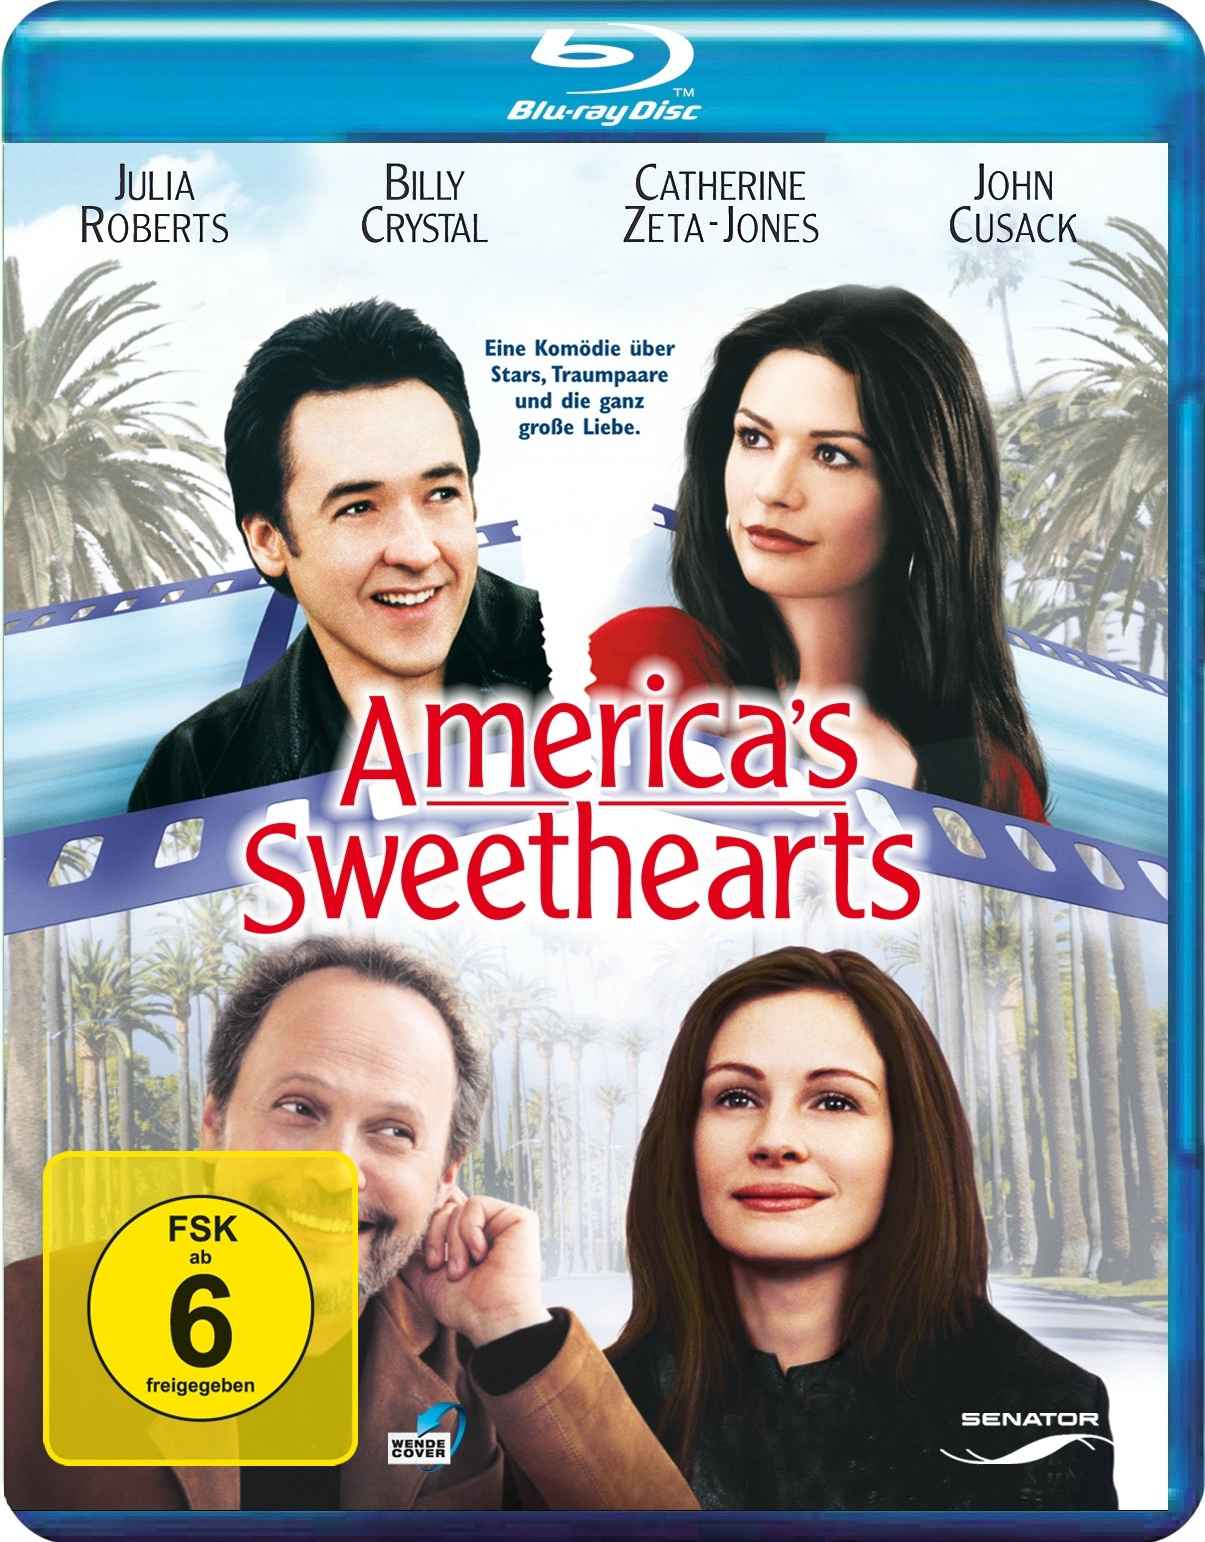 Americas Sweethearts 2001 Dub in Hindi full movie download